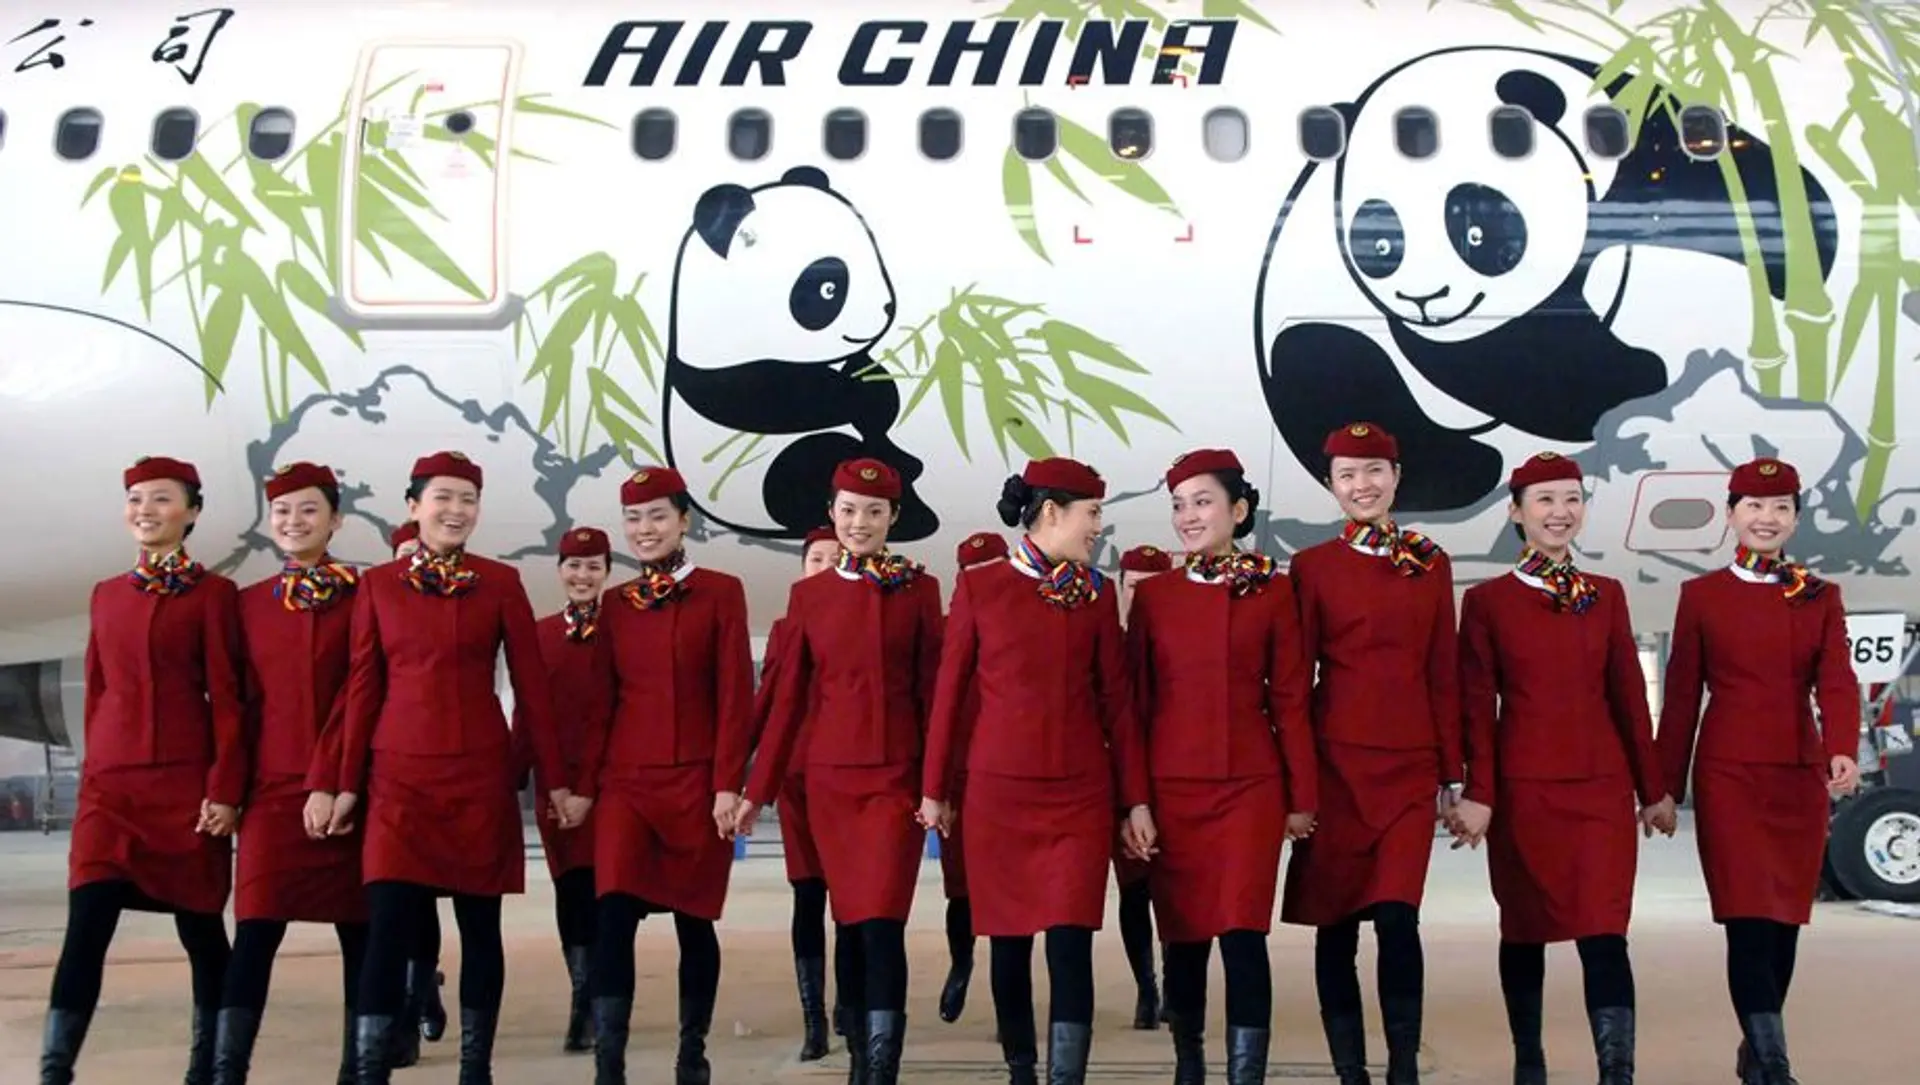 Airline review Sustainability - Air China - 0